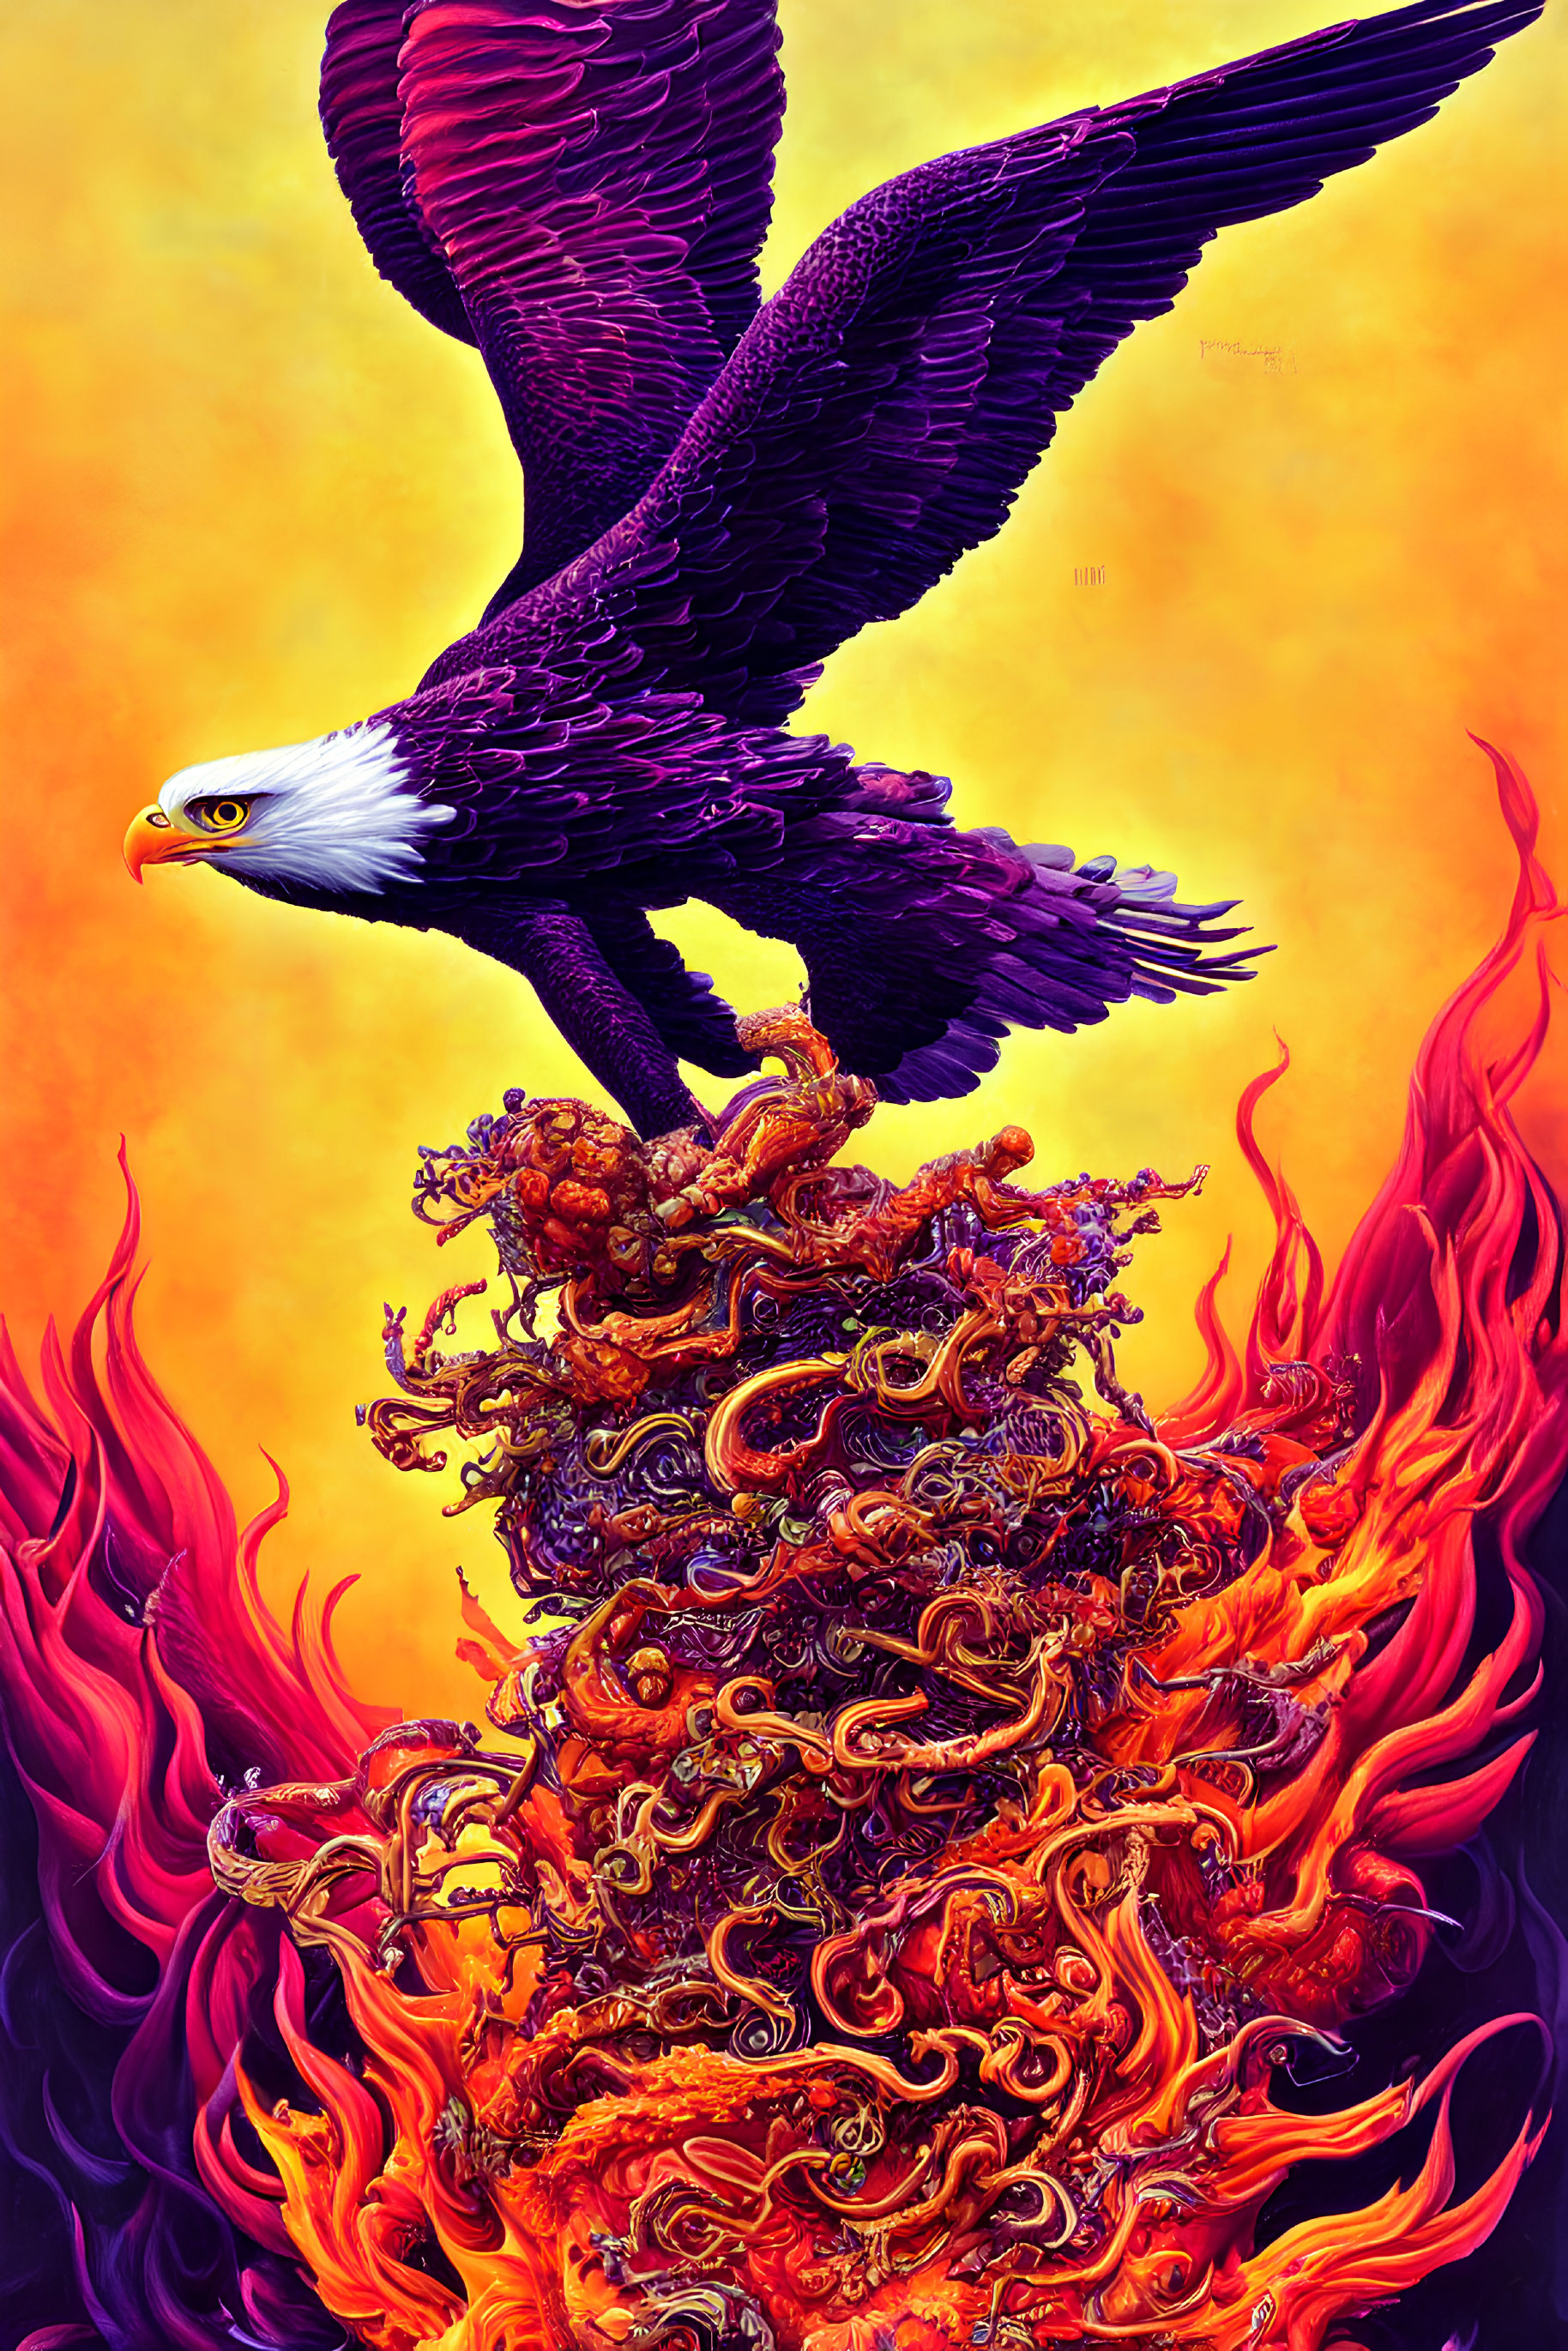 Majestic bald eagle flying over fiery column on yellow background